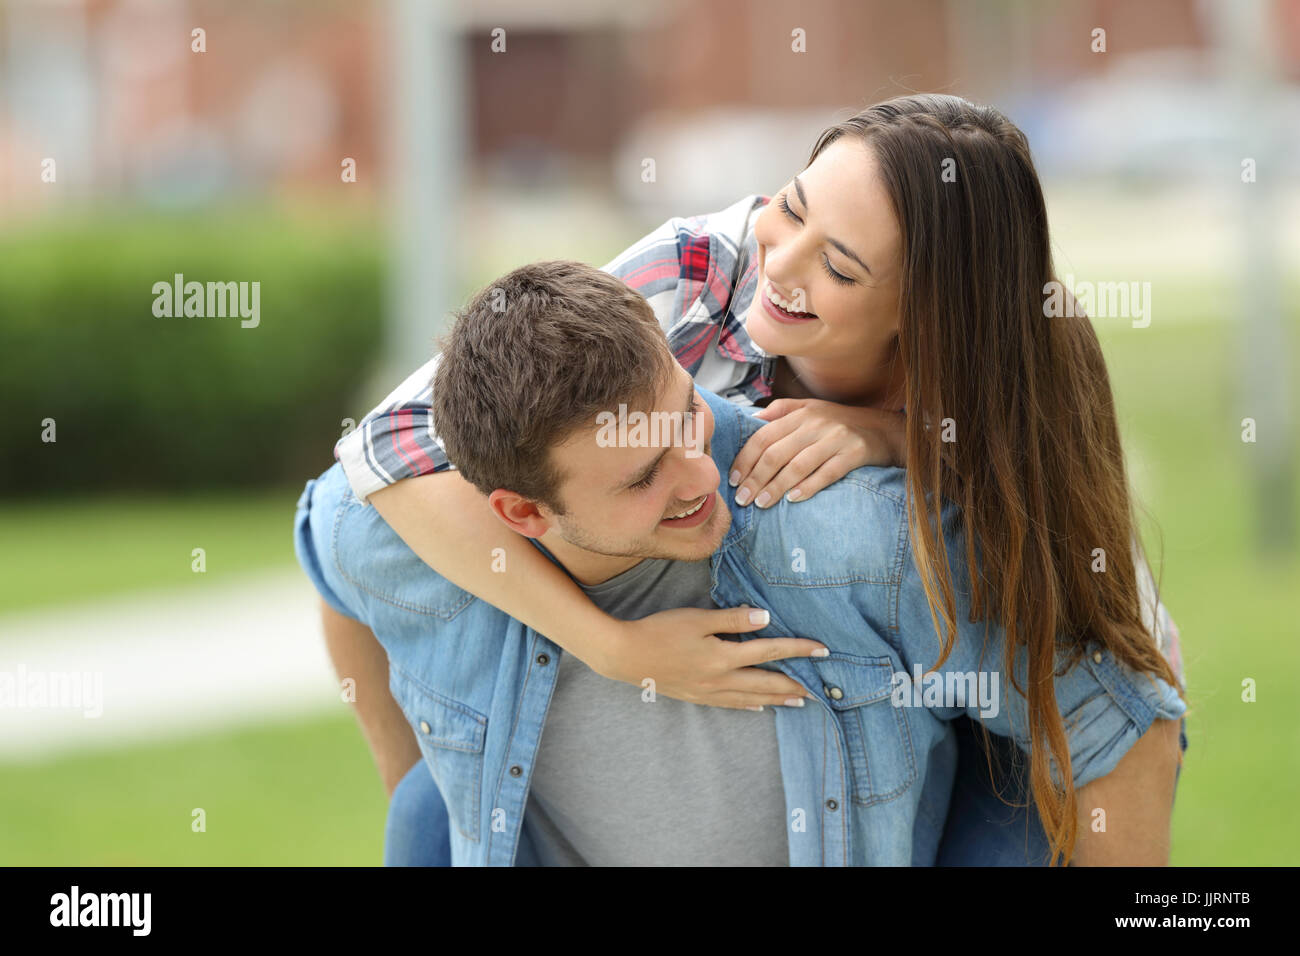 Front view of a happy couple of teens joking together piggyback outdoors in a park with a green background Stock Photo